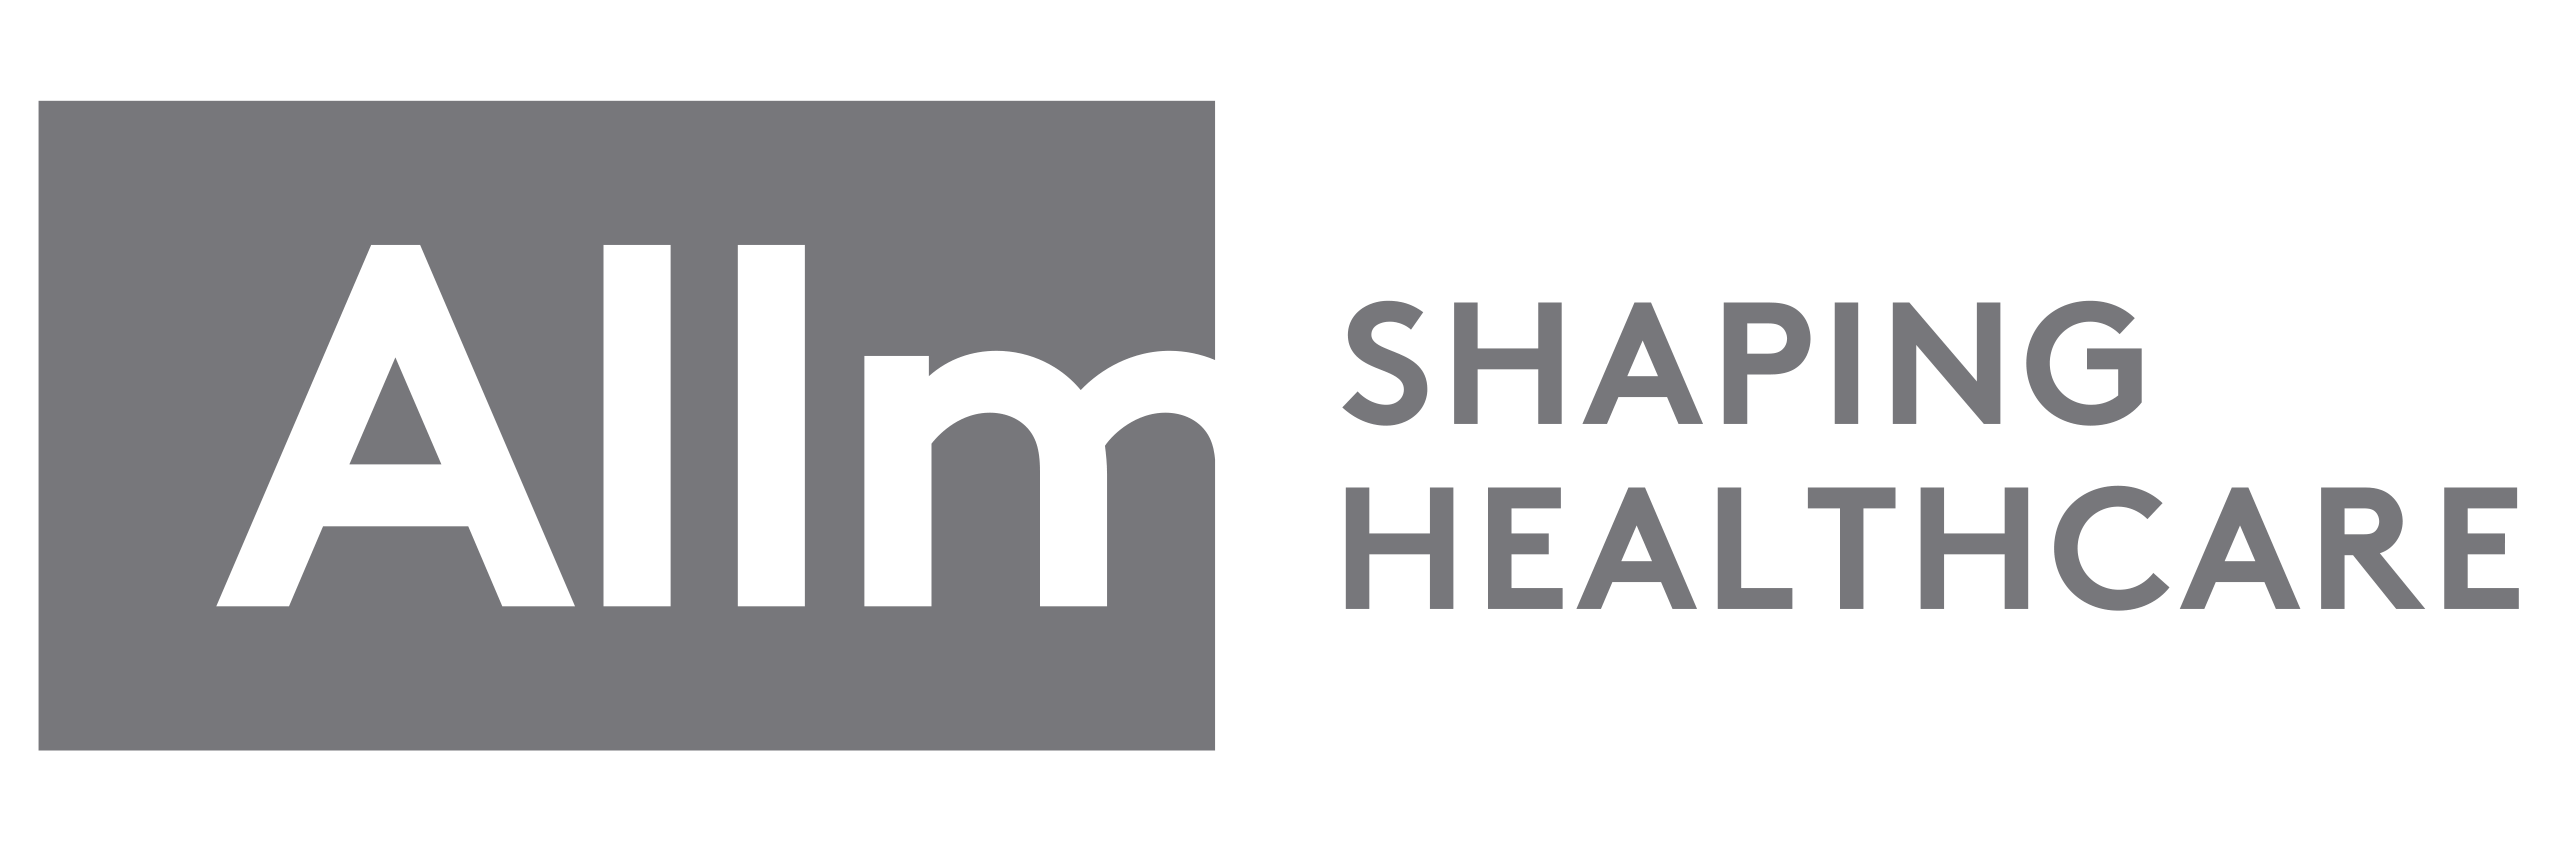 Allm shaping healthcare